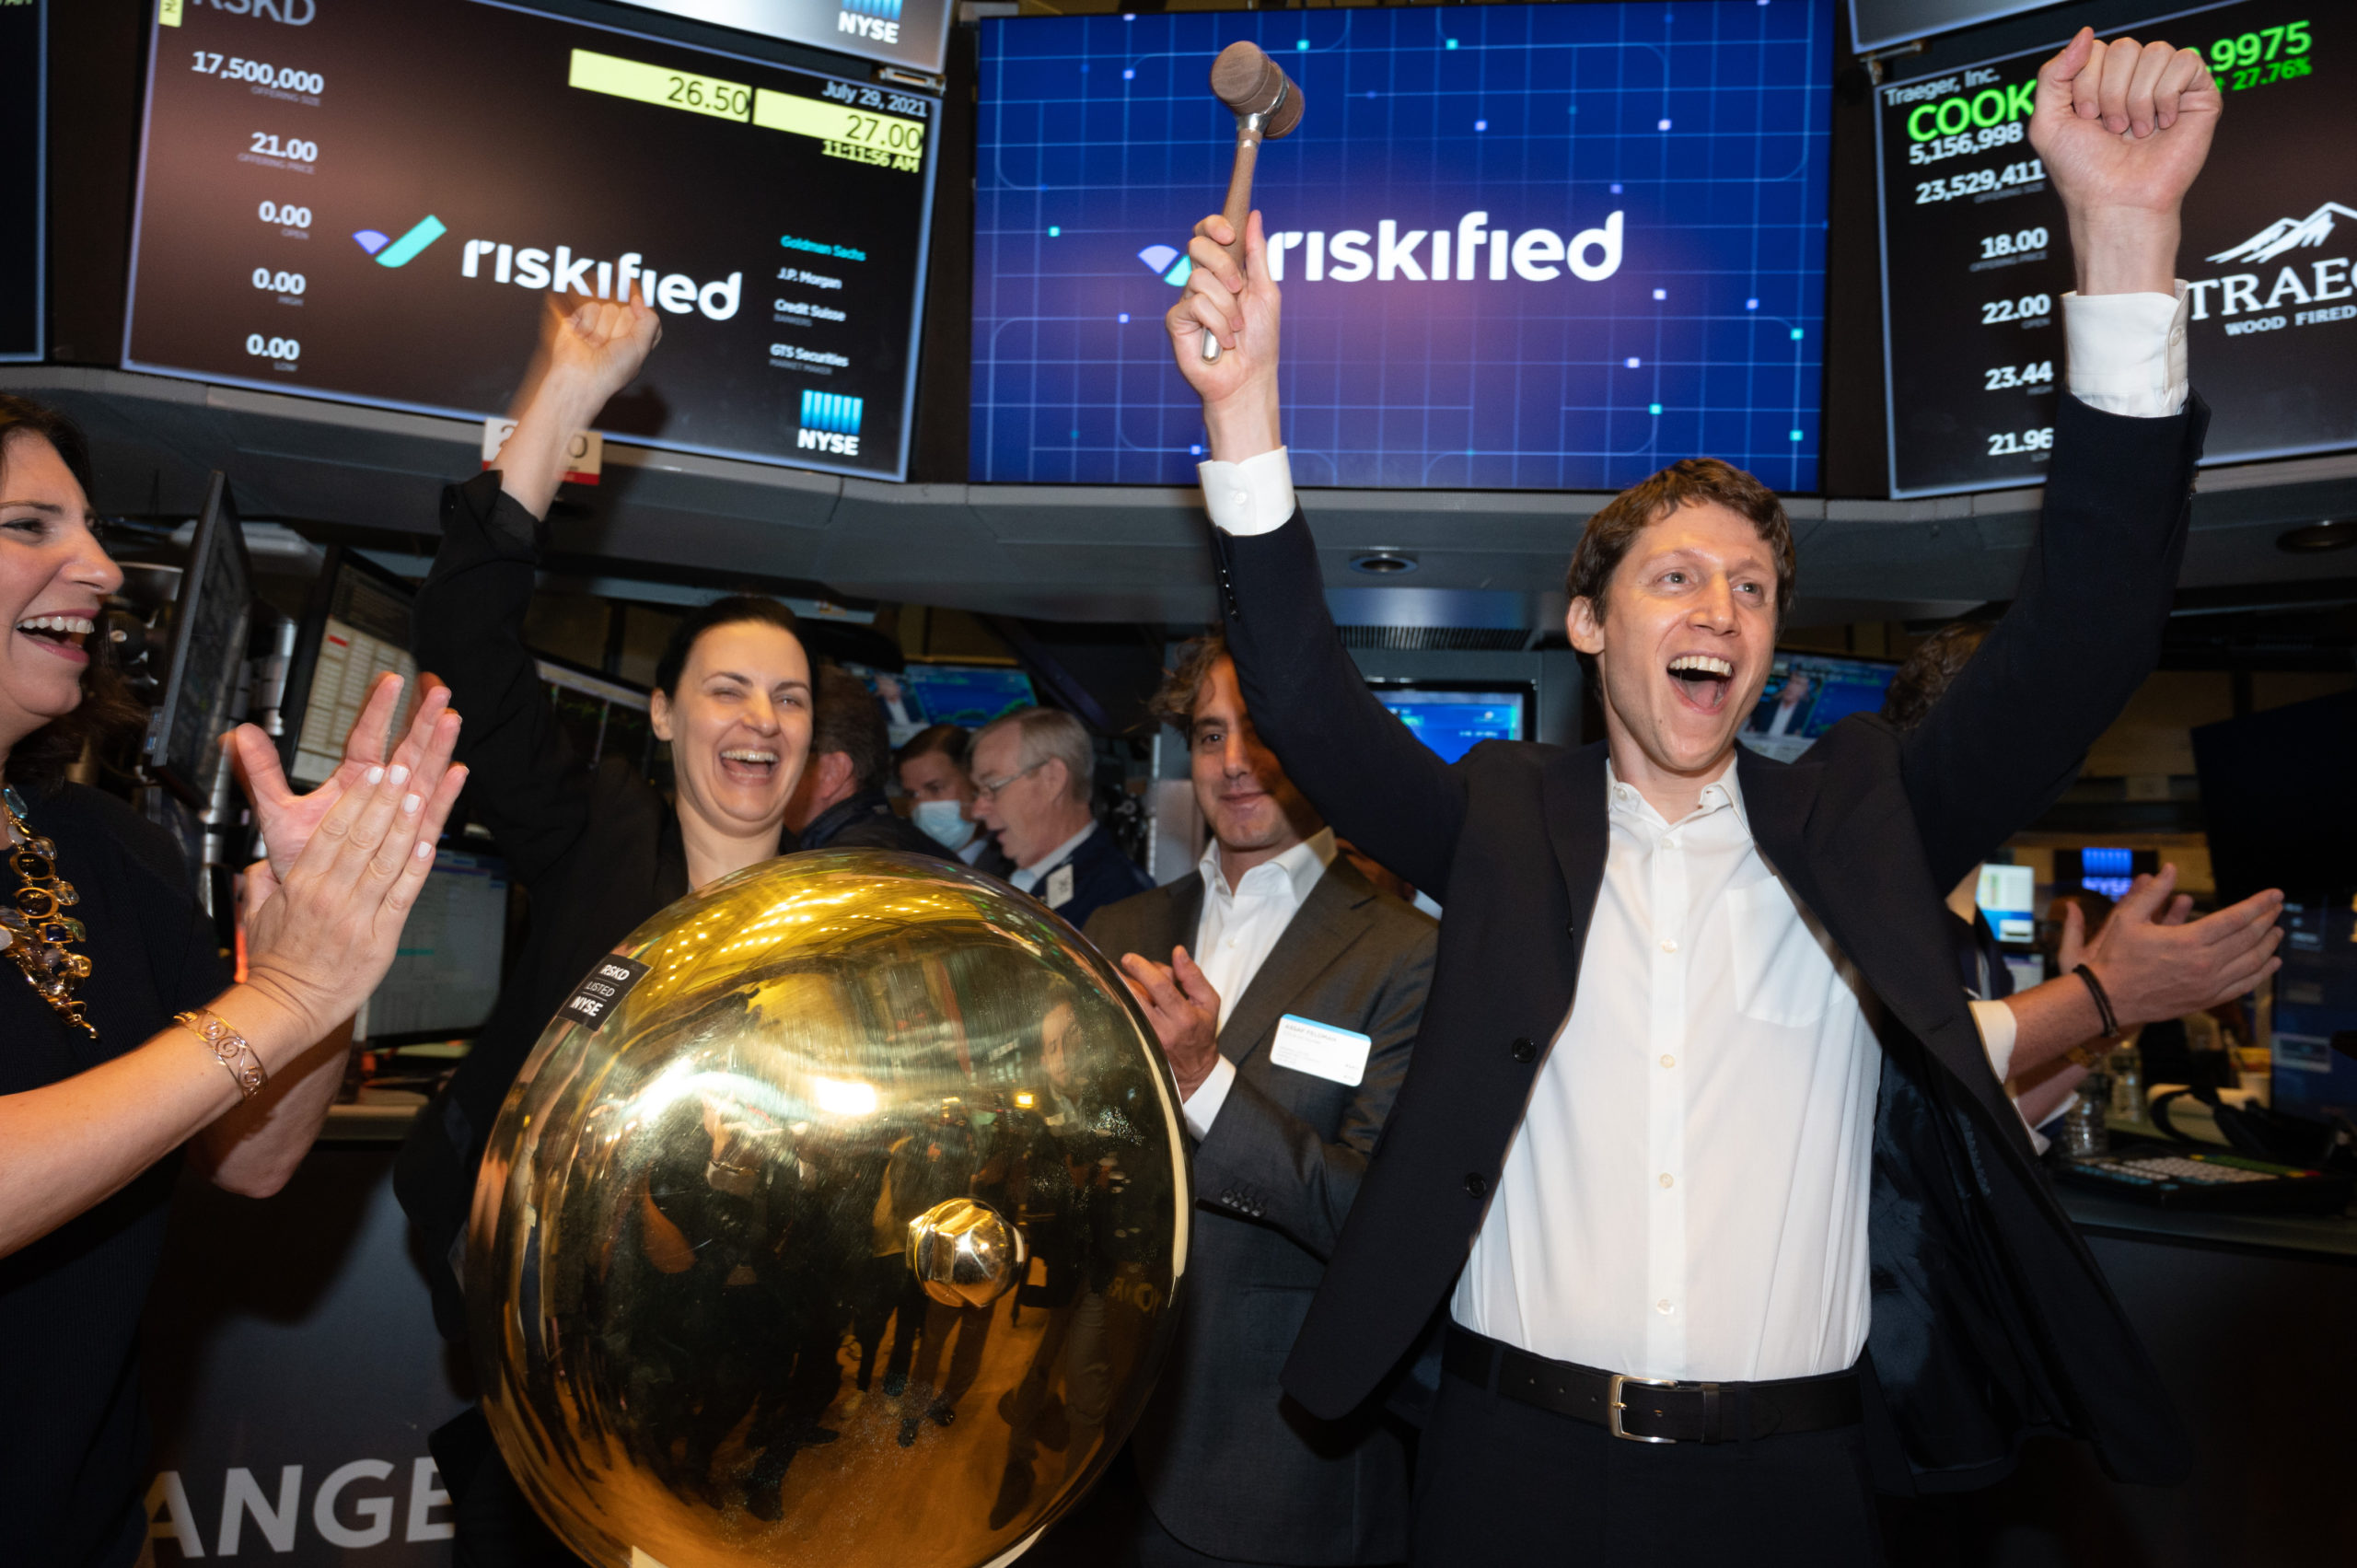 Riskified’s share price soars on IPO day, firm targets Asia in global expansion